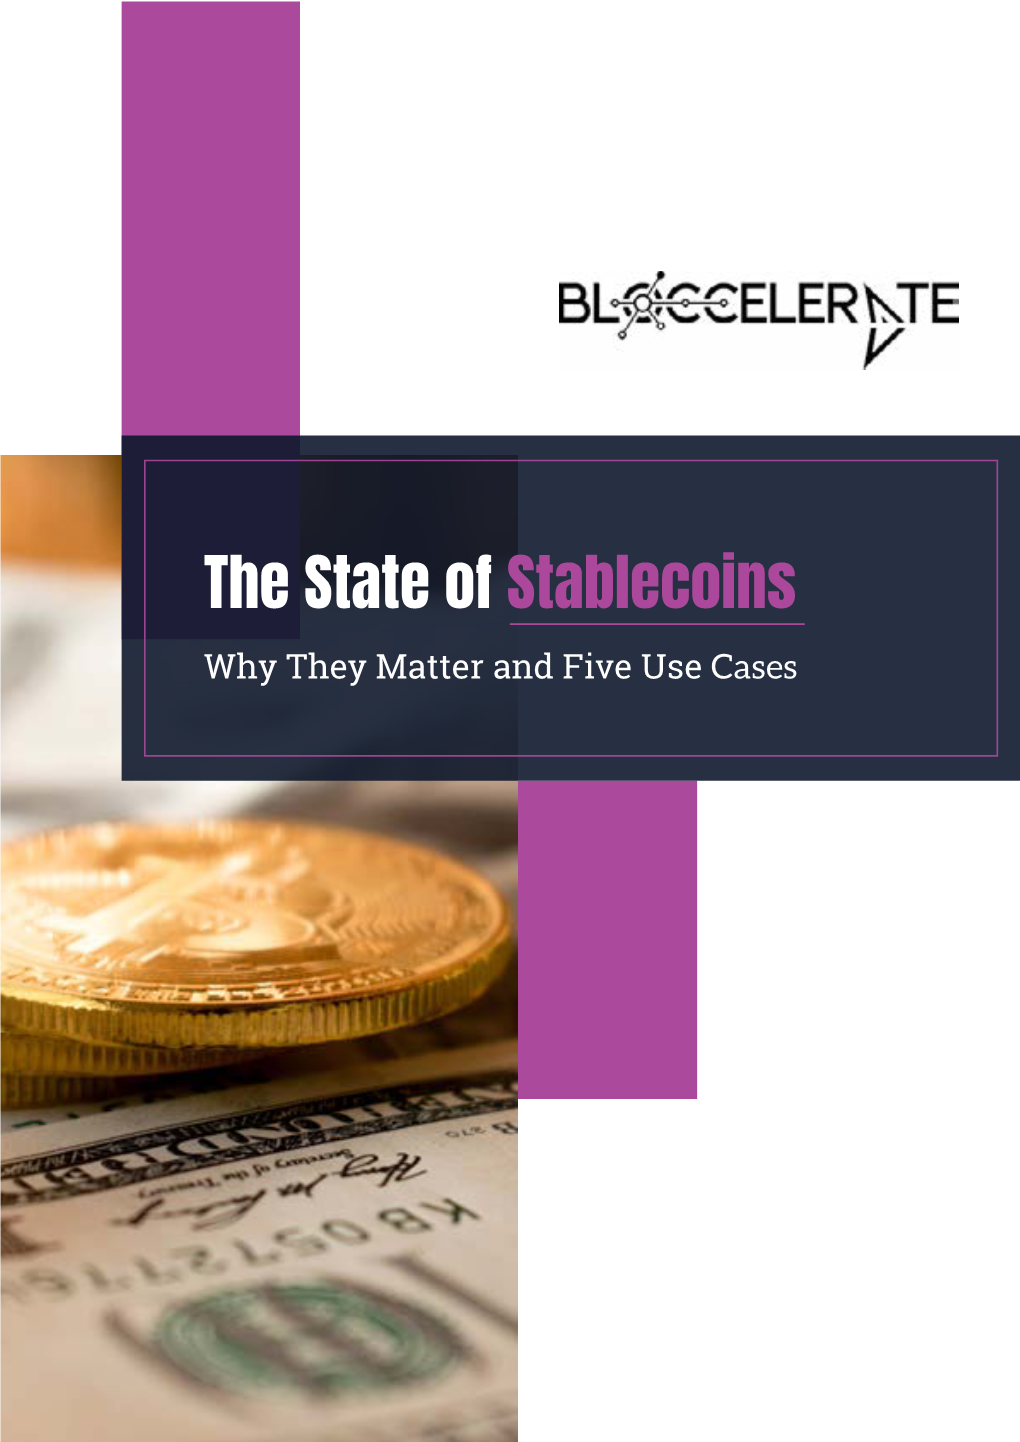 The State of Stablecoins Why They Matter and Five Use Cases the State of Stablecoins - Why They Matter and Five Use Cases Robert Lin & Mark Conrad